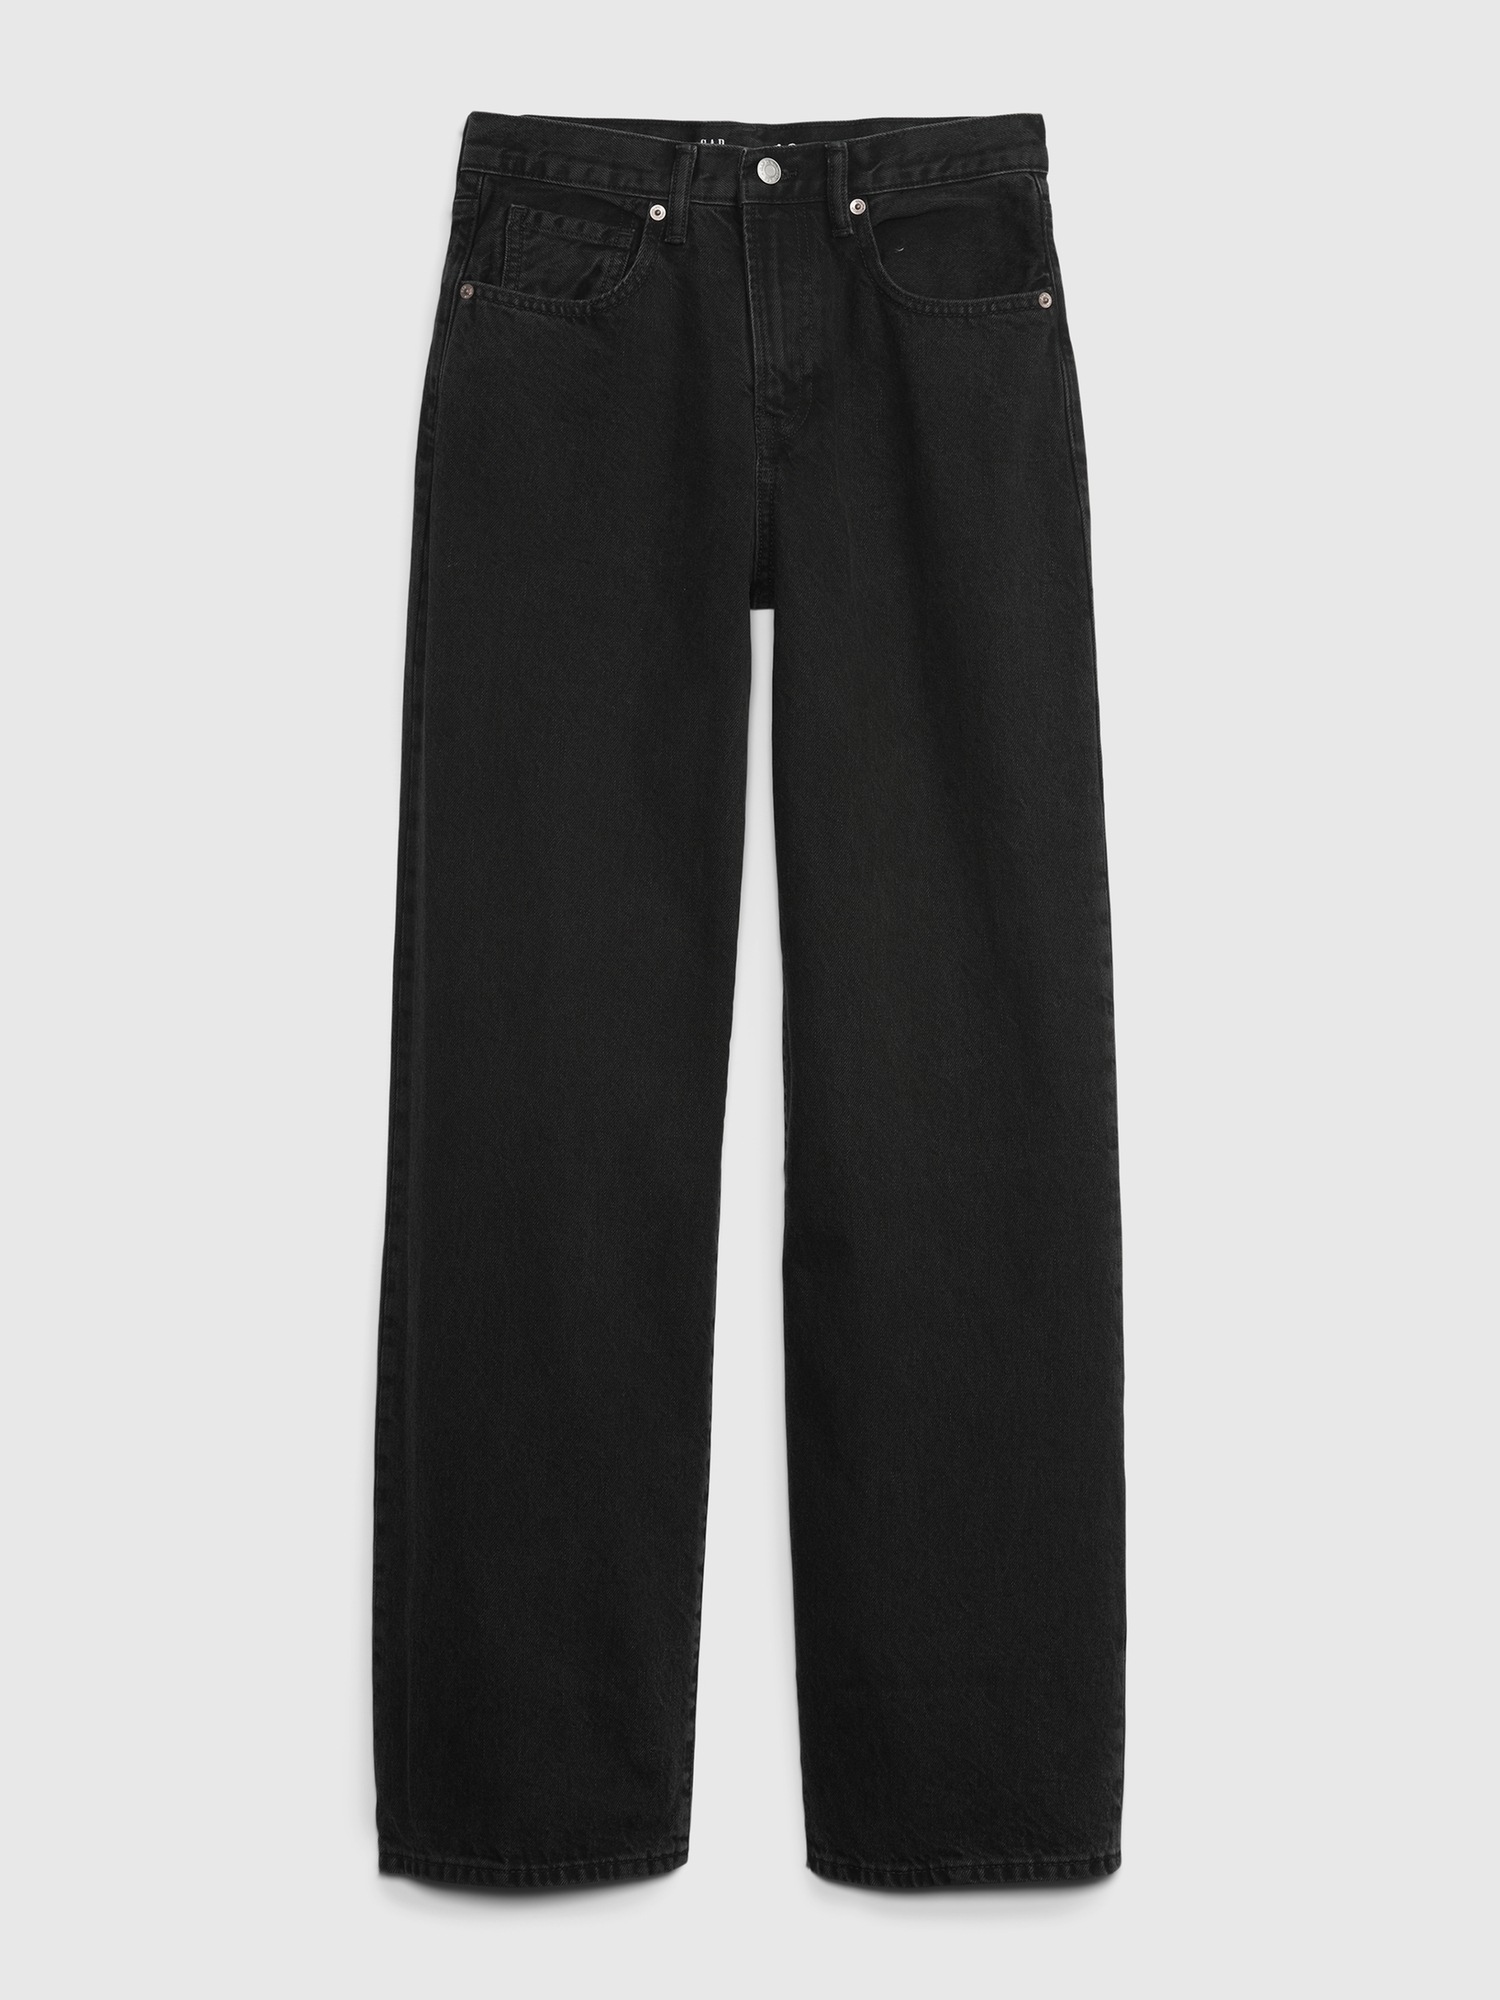 Teen Baggy Jeans with Washwell | Gap